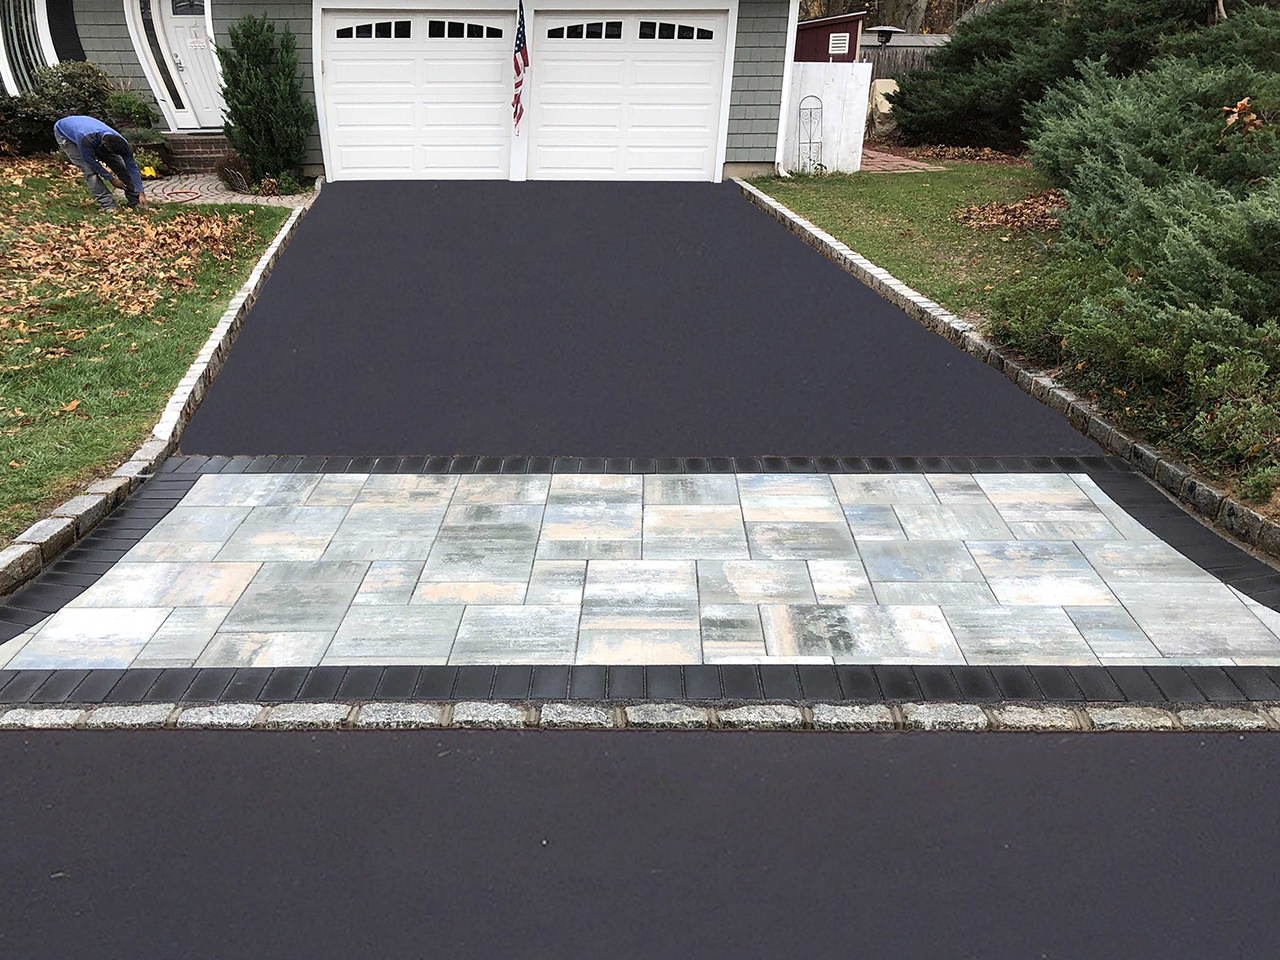 A professionally constructed driveway design by Affordable Patio, combining functionality and aesthetic beauty